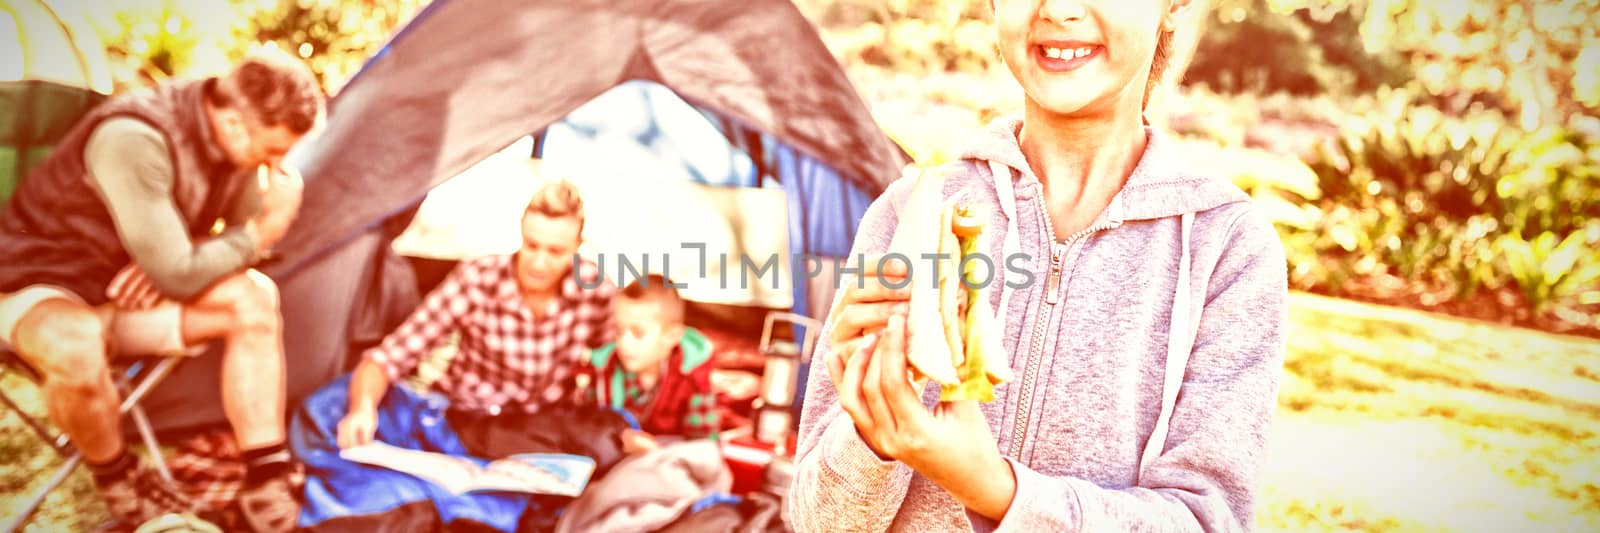 Portrait of smiling girl holding a sandwich while family sitting outside the tent